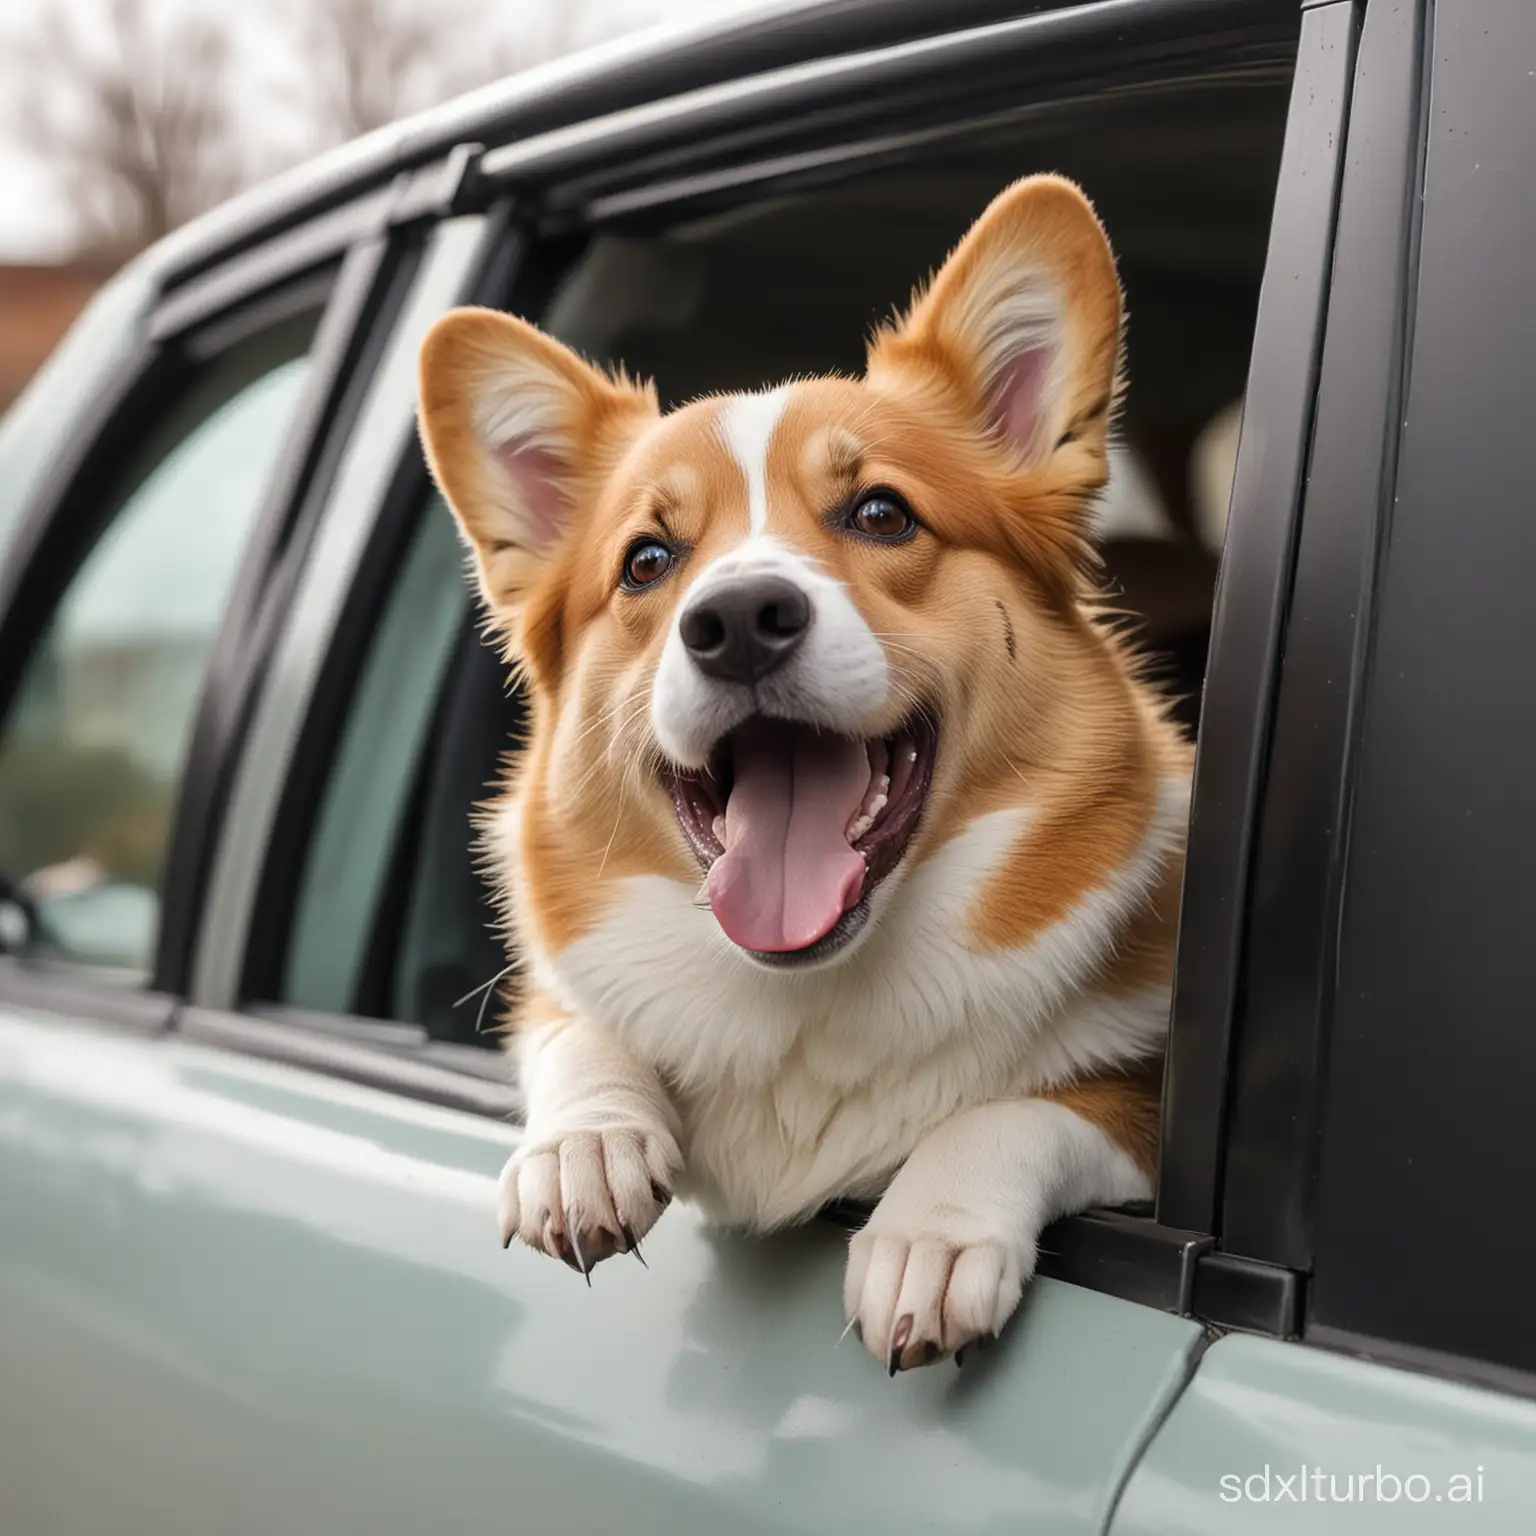 Friendly-Corgi-Dog-Waving-with-Tongue-Out-from-Car-Window